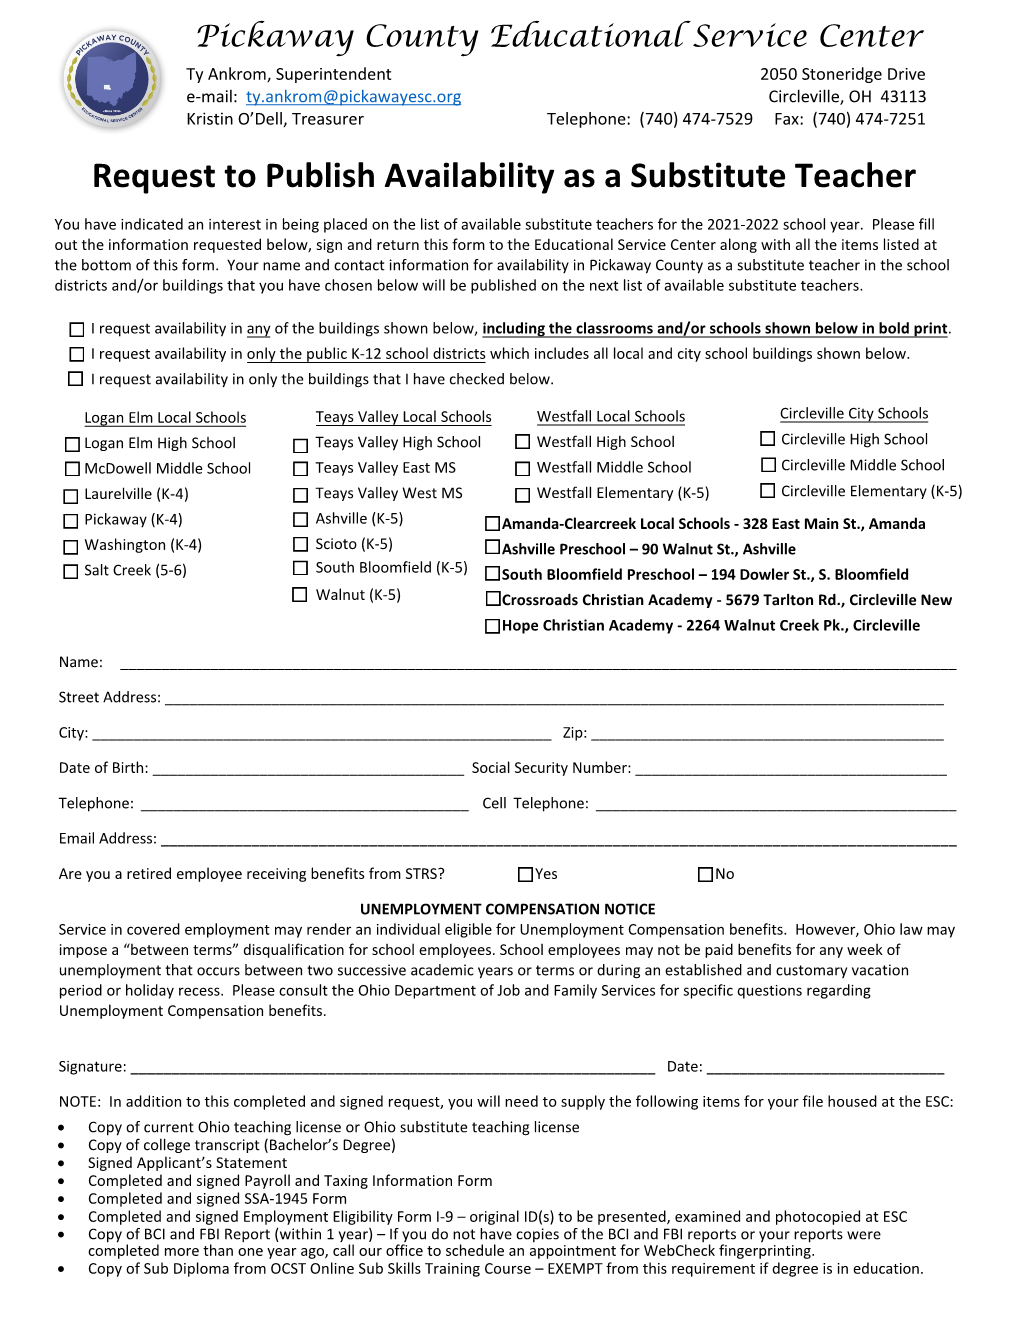 Request to Publish Availability As a Substitute Teacher